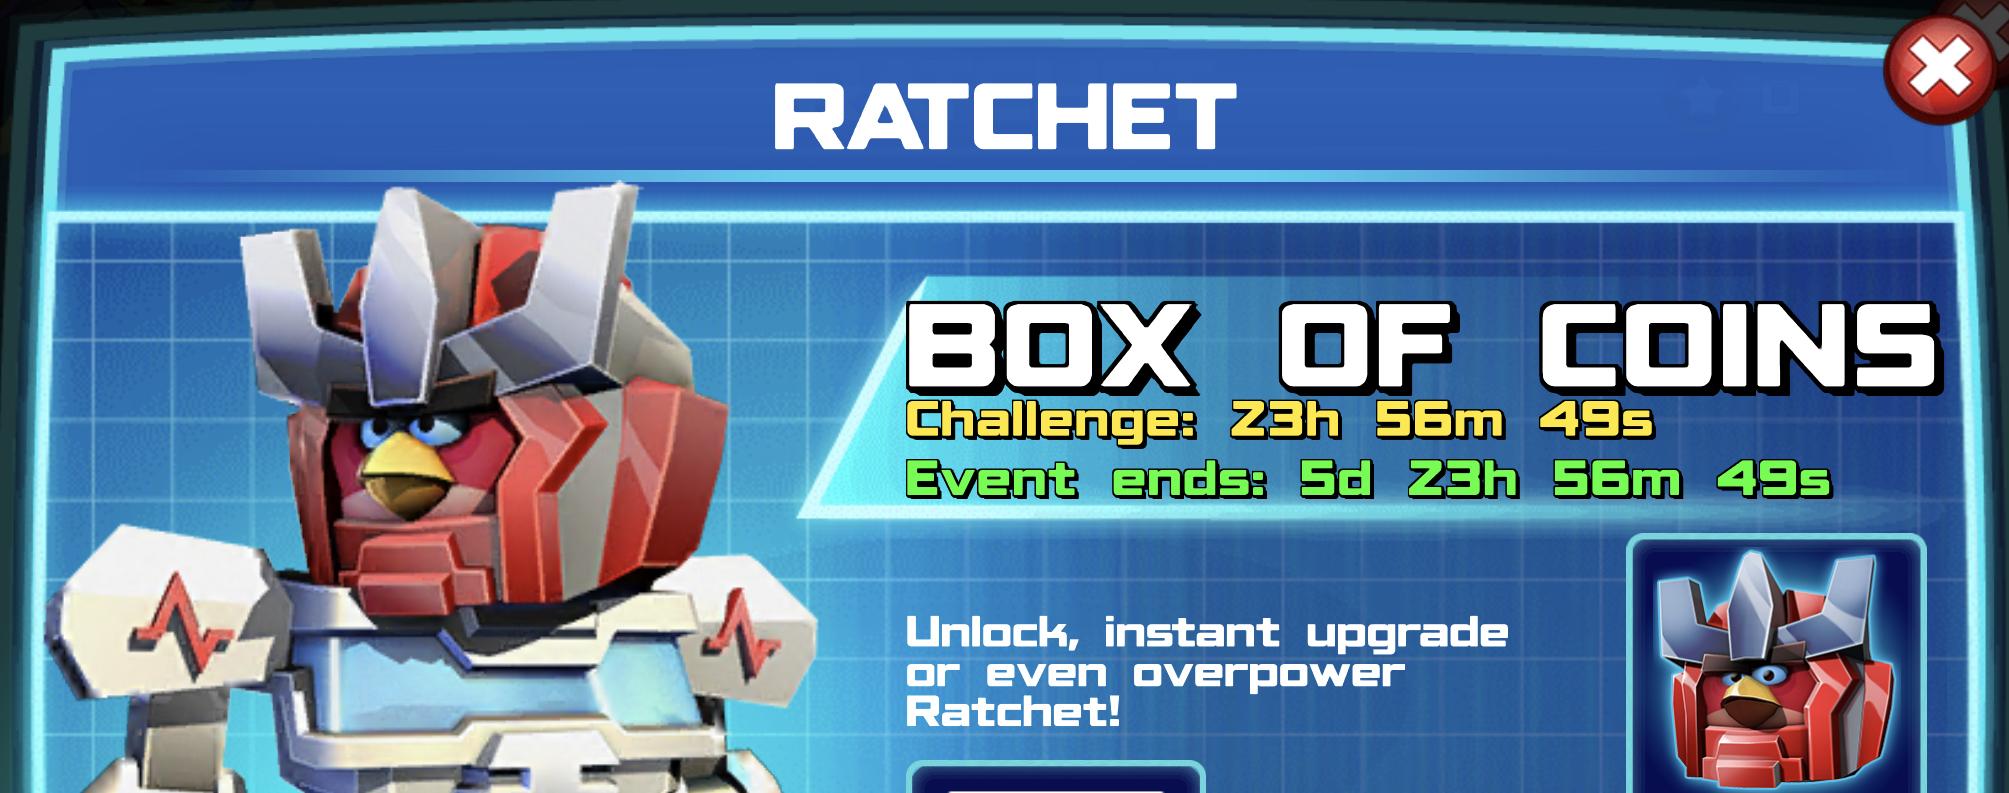 The event banner for Ratchet